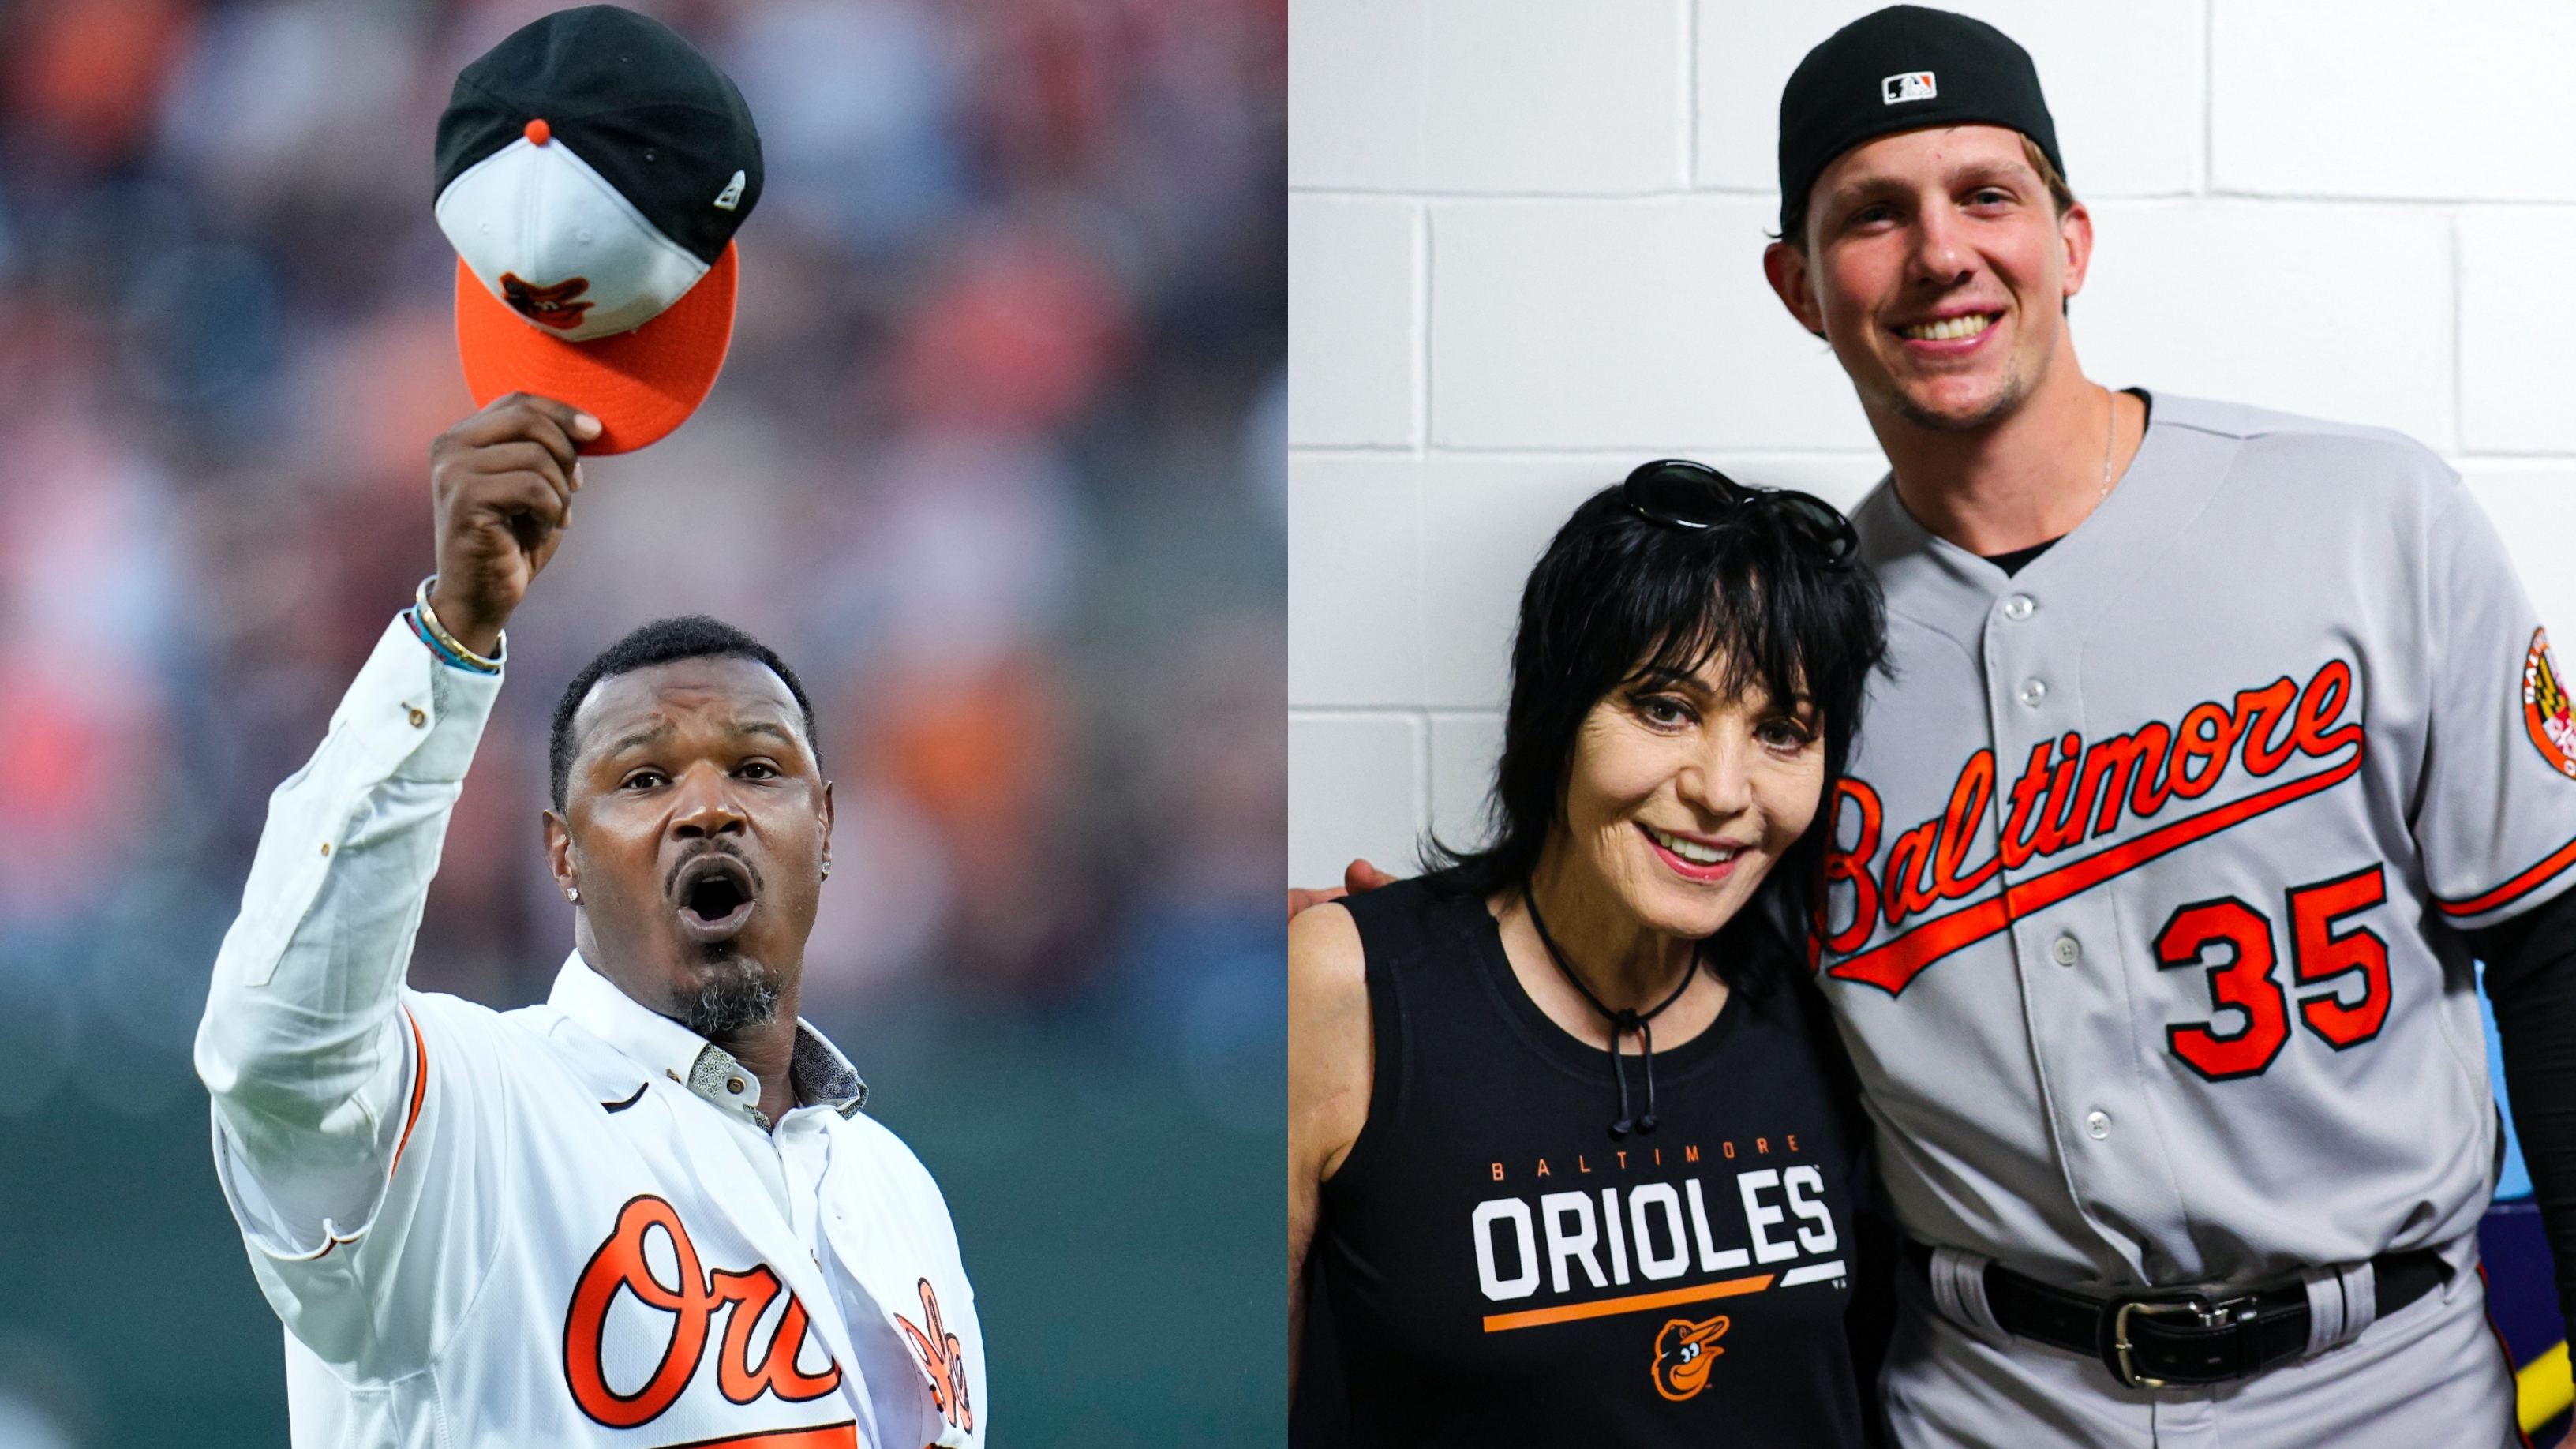 Adam Jones to throw first pitch, Joan Jett to sing national anthem before  Orioles' playoff opener Saturday vs. Rangers